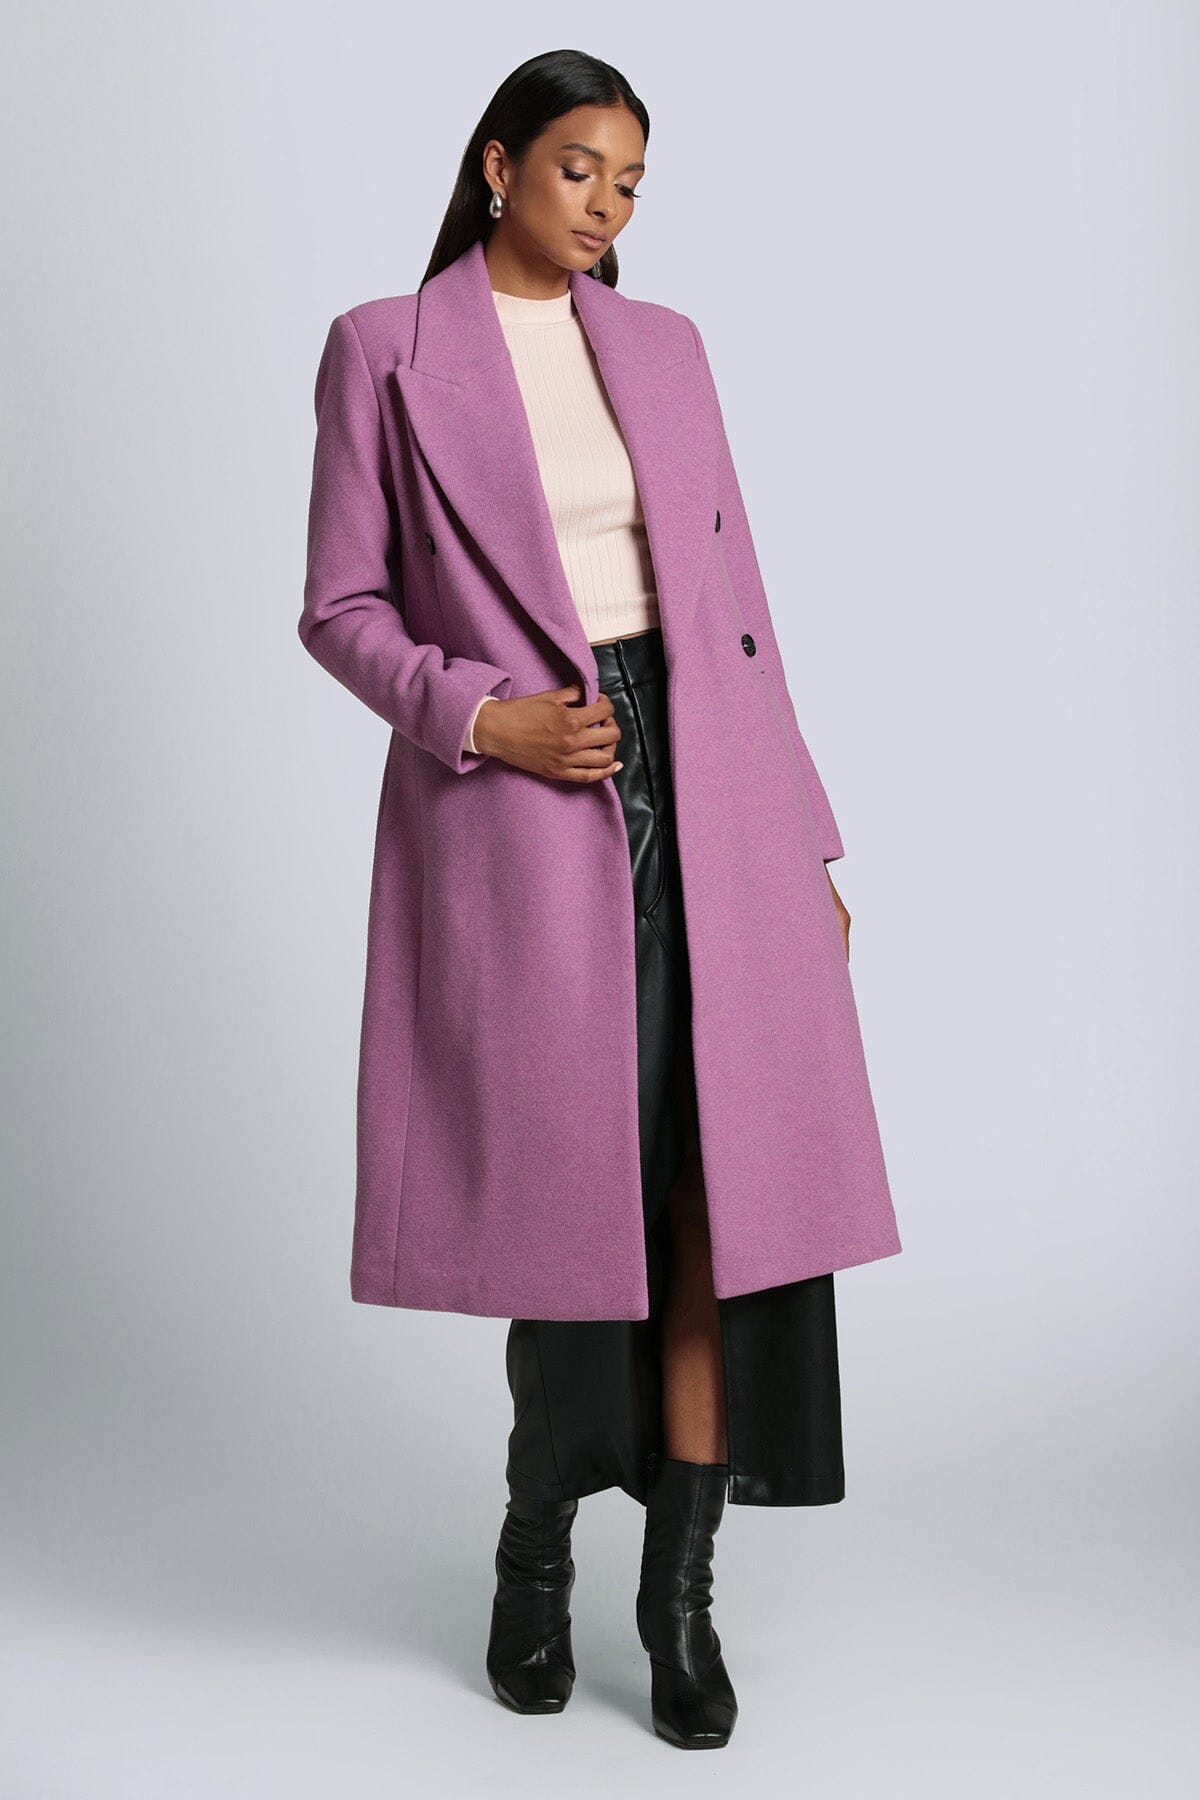 Designer fashion hyacinth pink tailored double-breasted long coat by Avec Les Filles Coats & Jackets